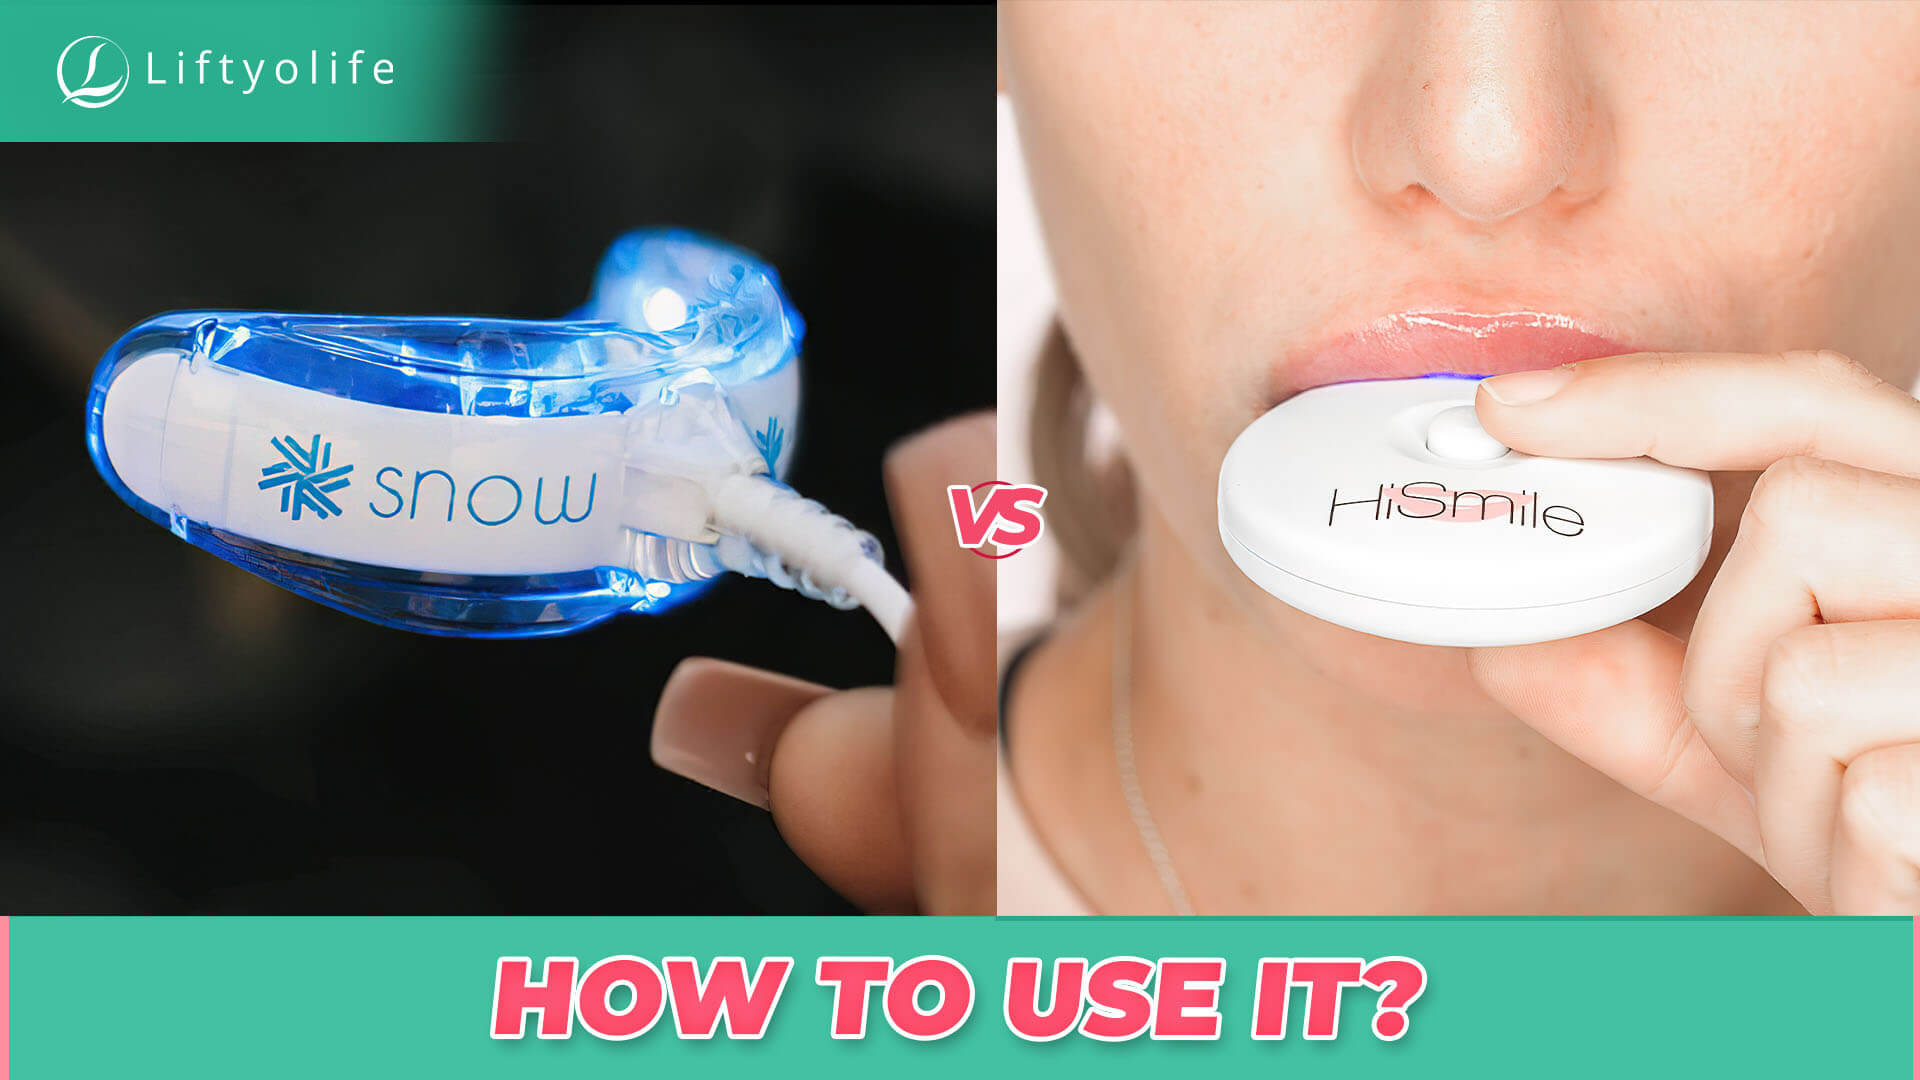 Snow Teeth Whitening Vs Hismile: How To Use It?